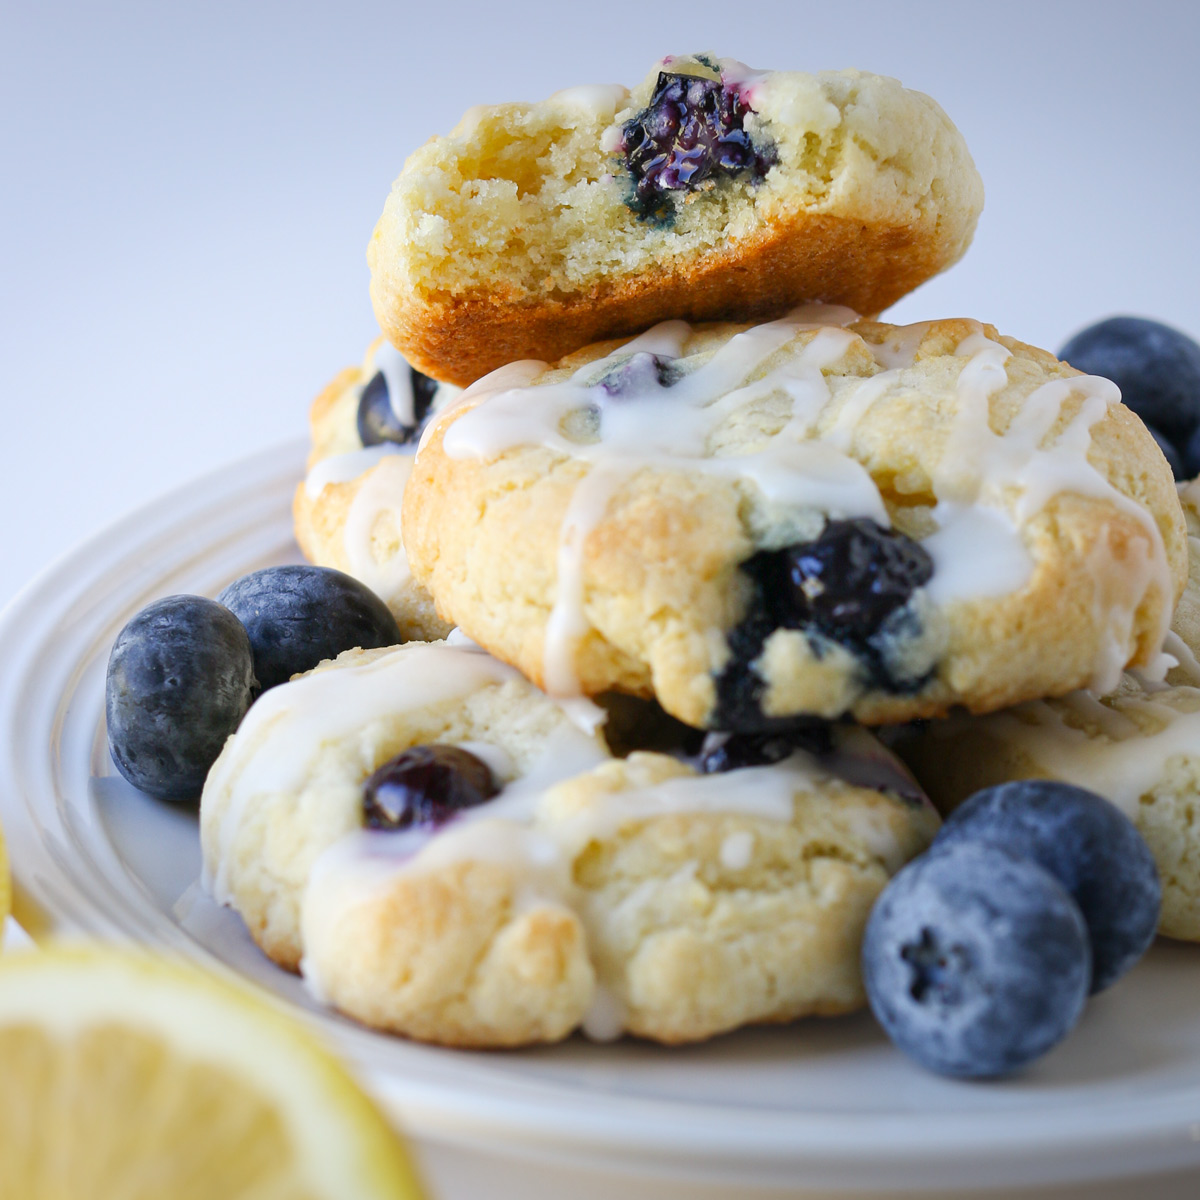 cookies stacked on white plate with fresh blueberries and a lemon round in the foreground.